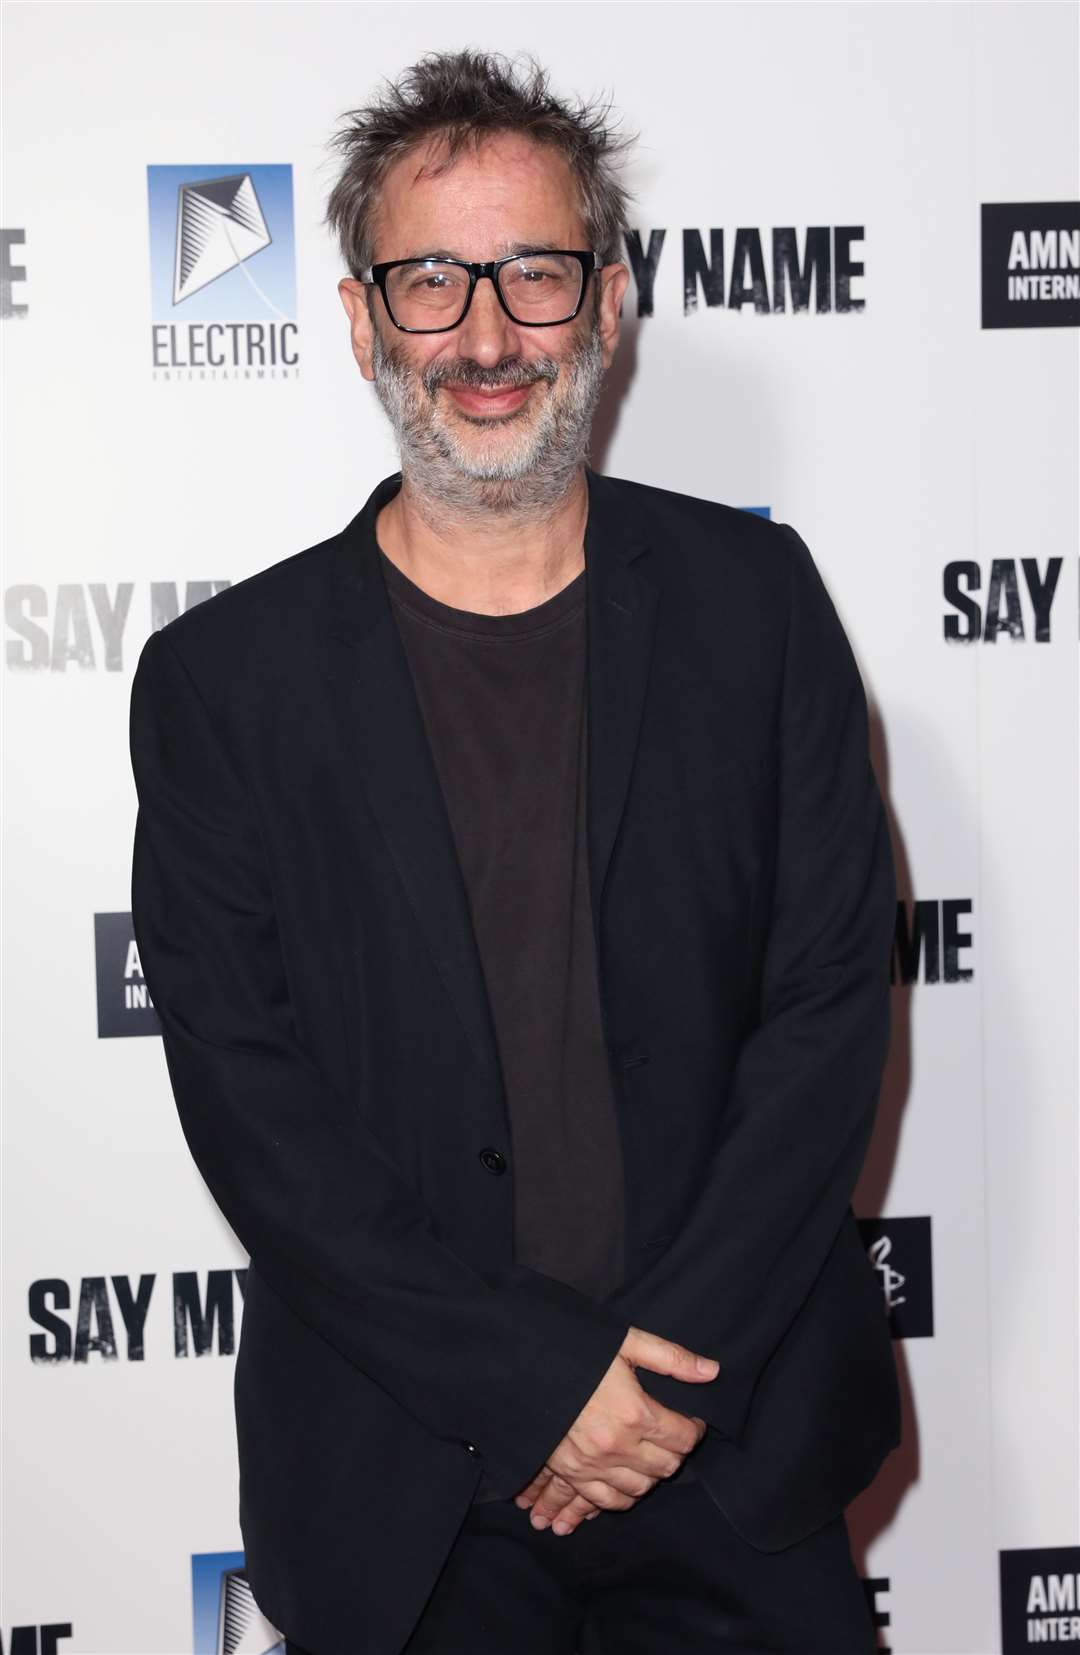 David Baddiel criticised the PM over his stance on players taking the knee (Isabel Infantes/PA)